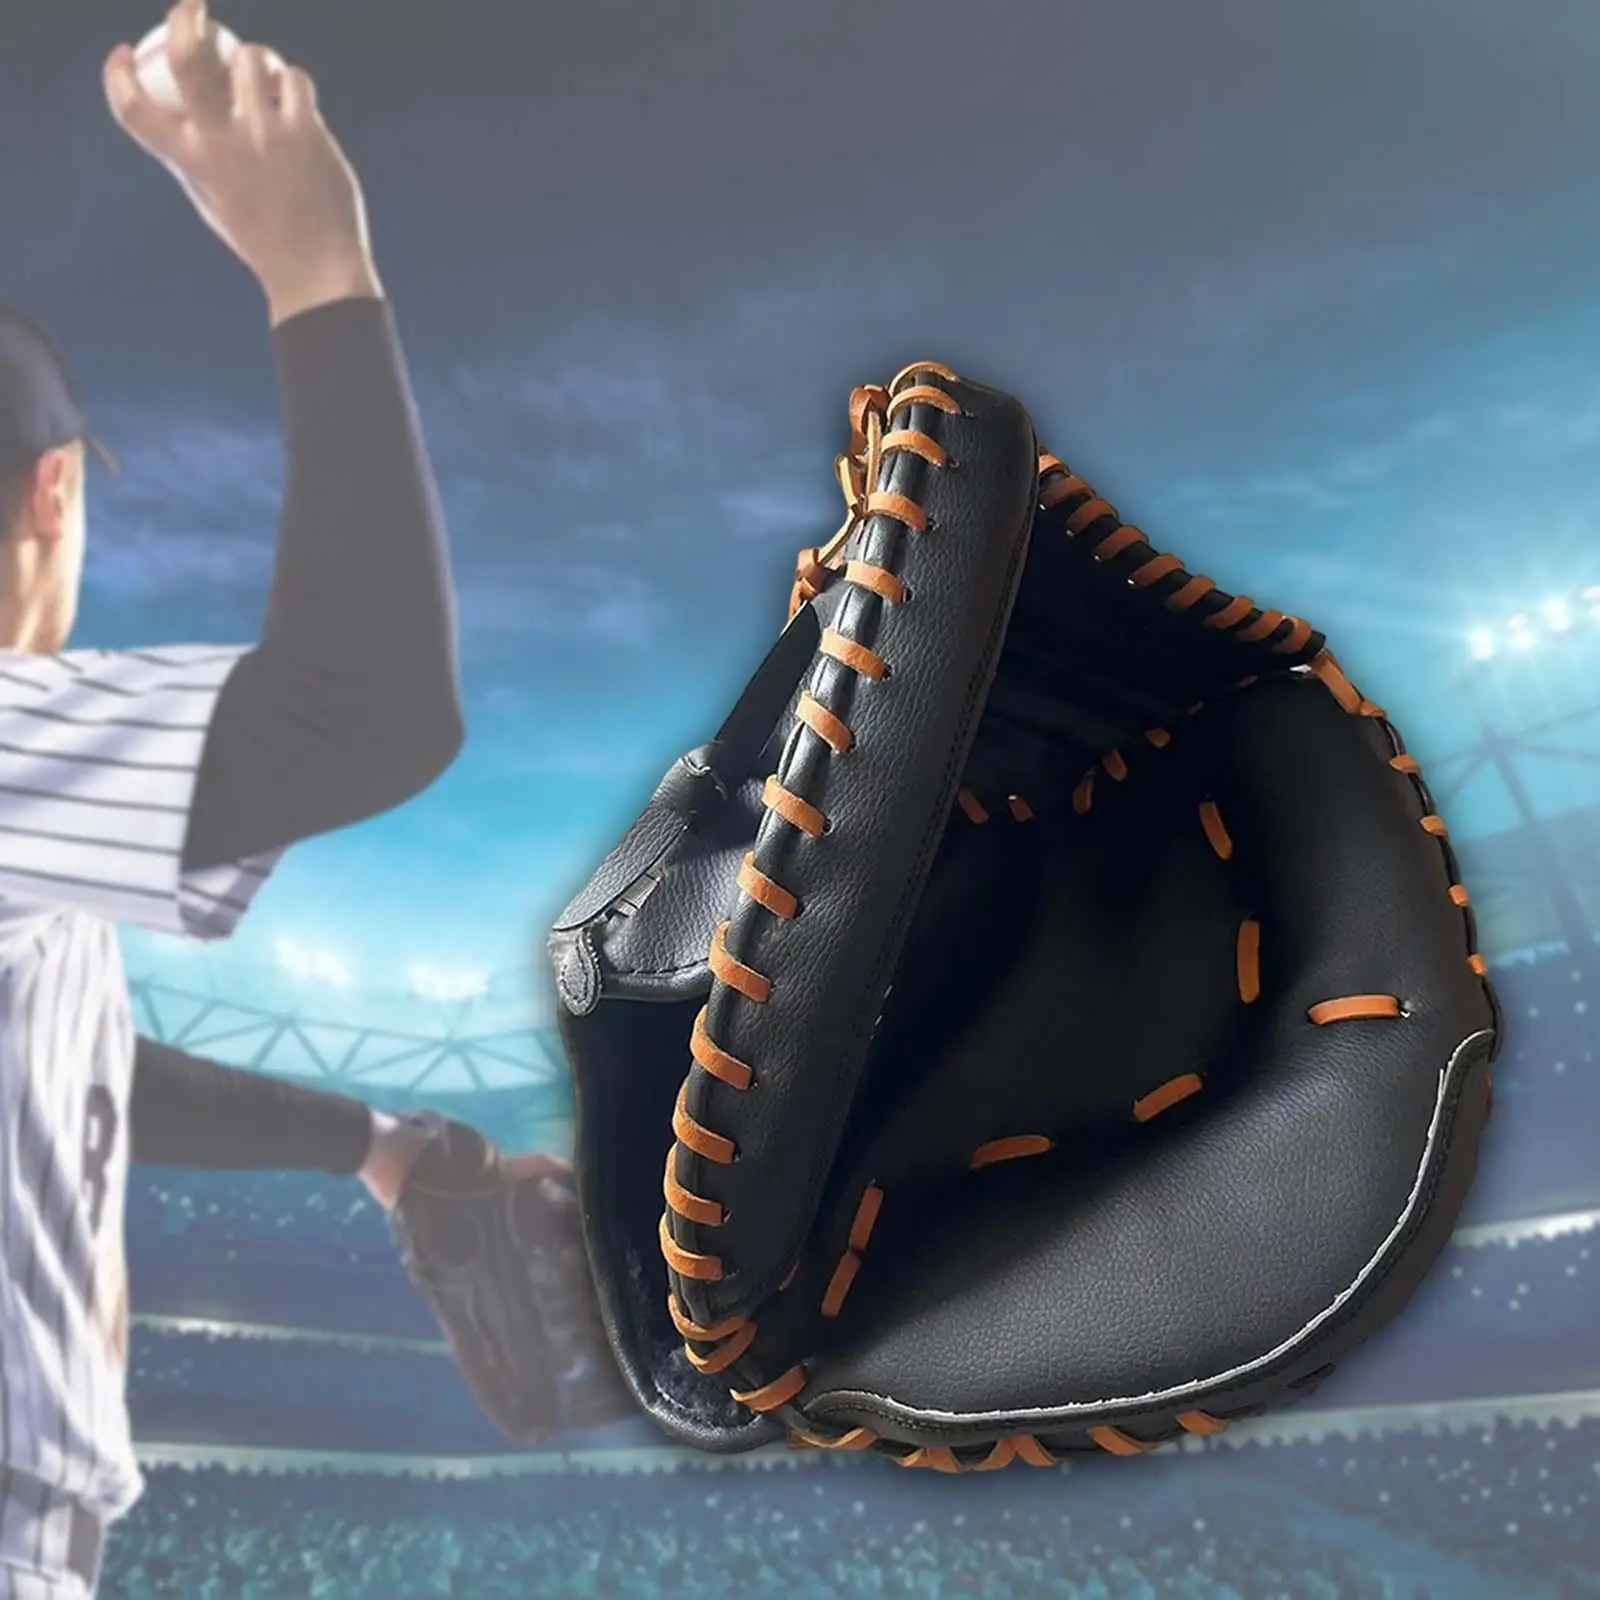 Baseball Glove Infield Outfield Gloves Left Hand Glove Batting Gloves Baseball Mitt PU Baseball Softball Gloves for Youth Adults